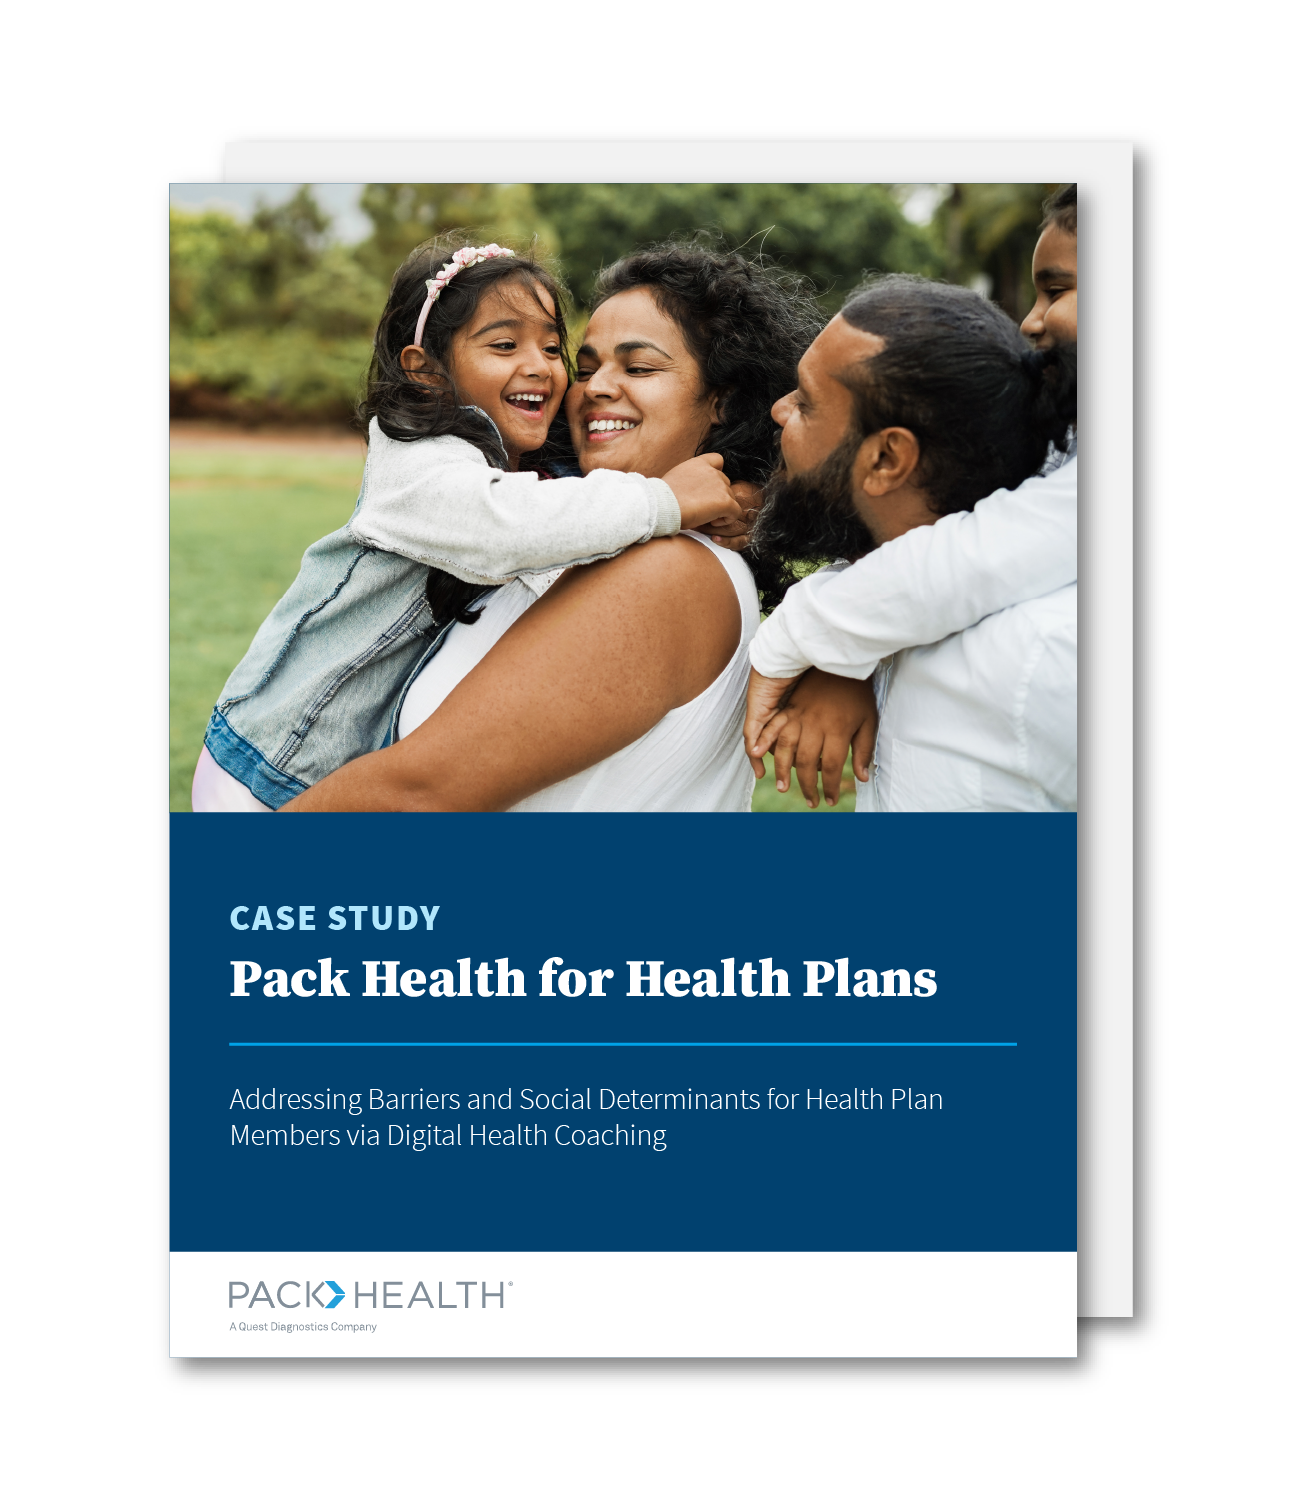 Case Study: Pack Health for Health Plans